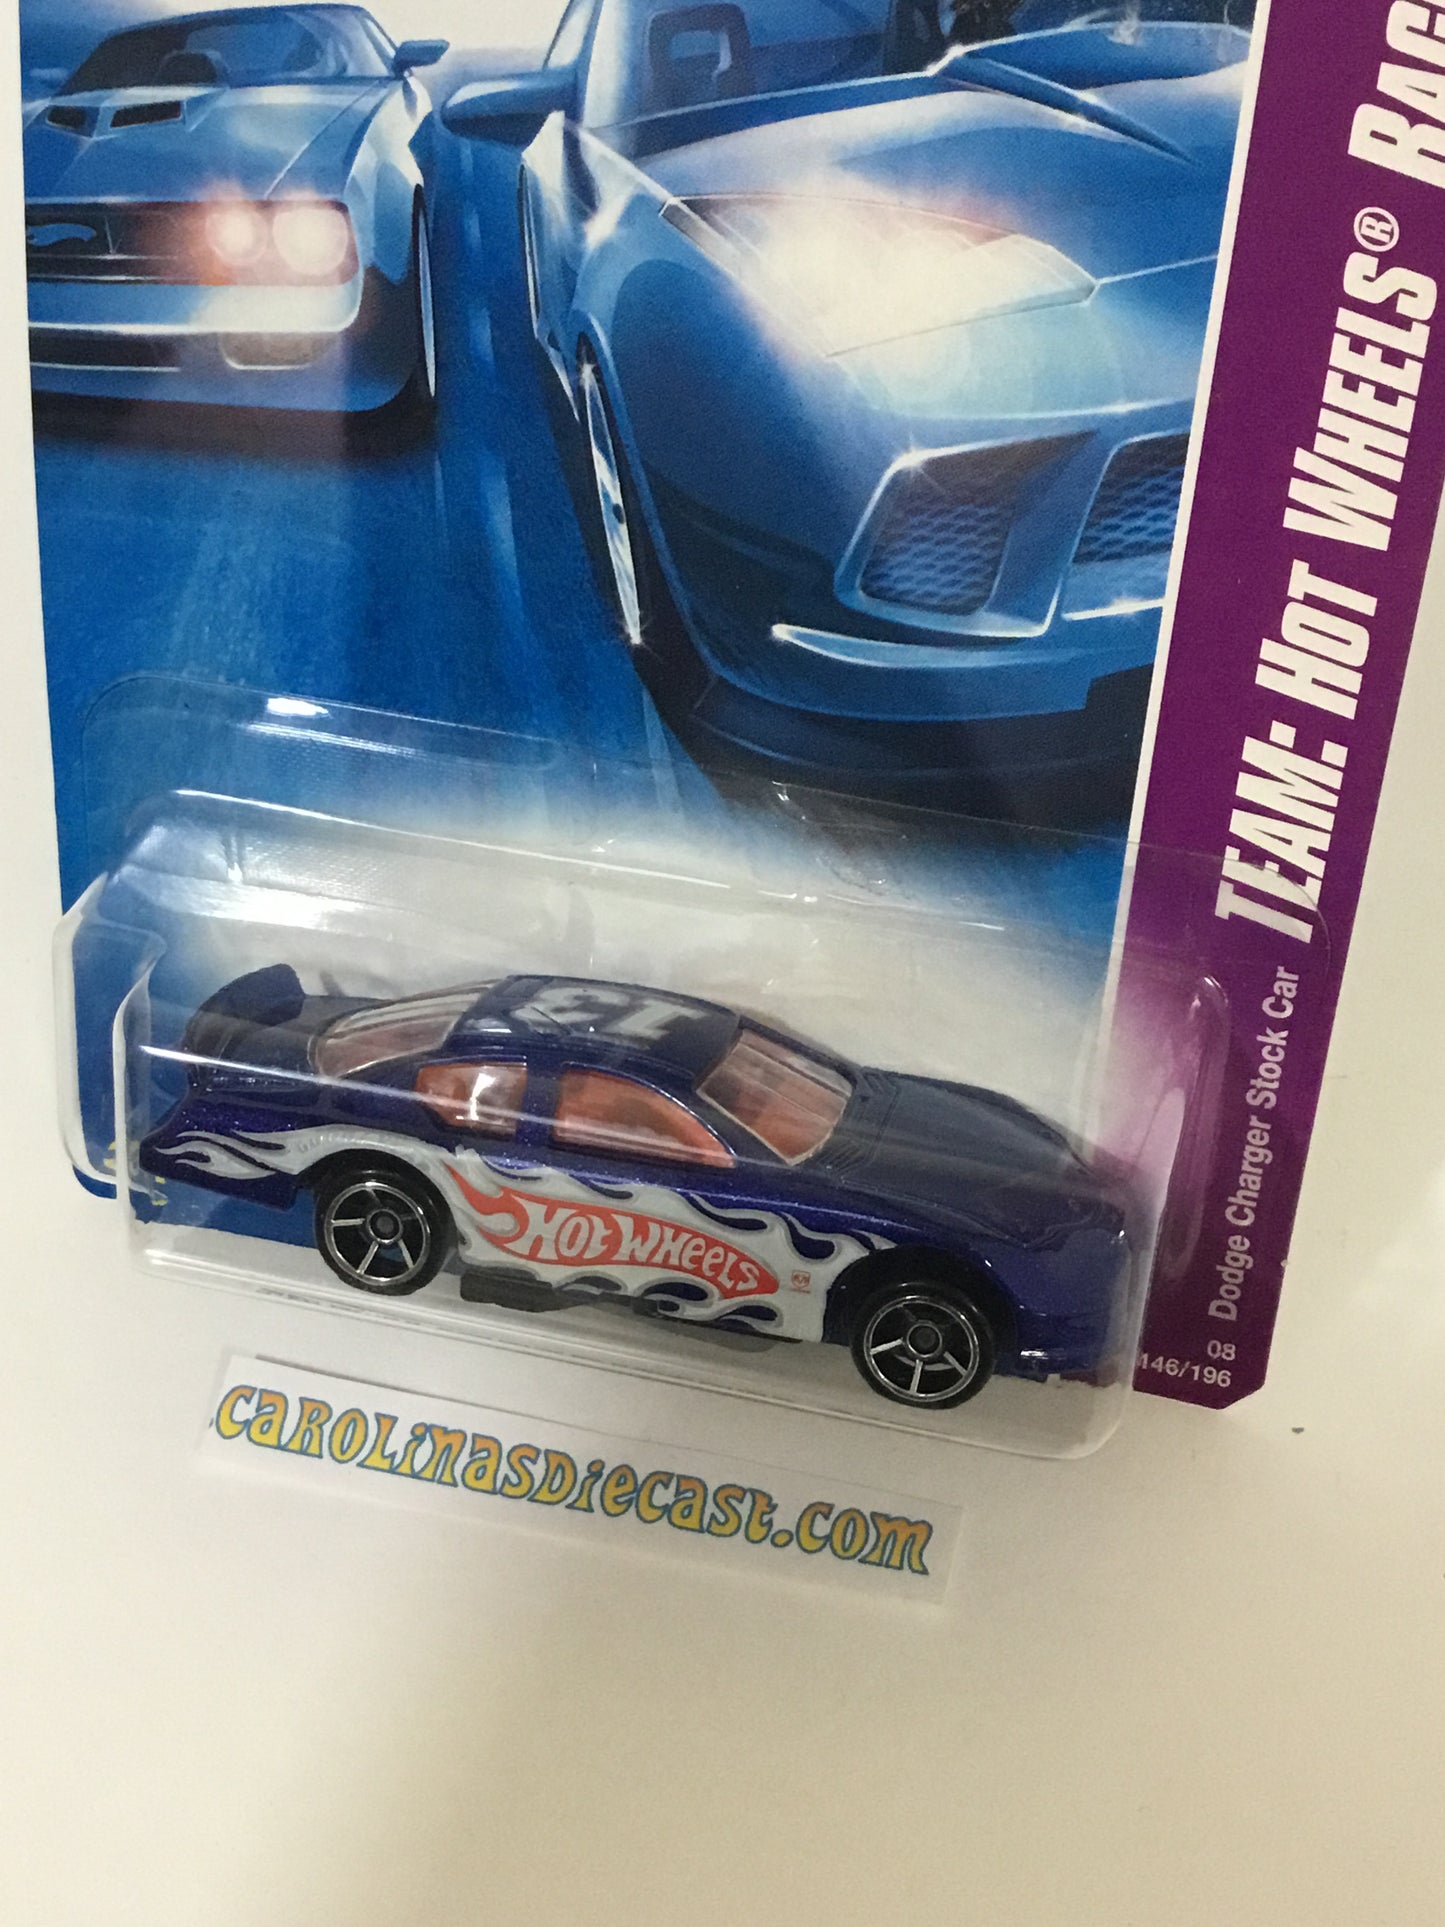 2008 Hot Wheels #146 Dodge charger stock car (FFF3)